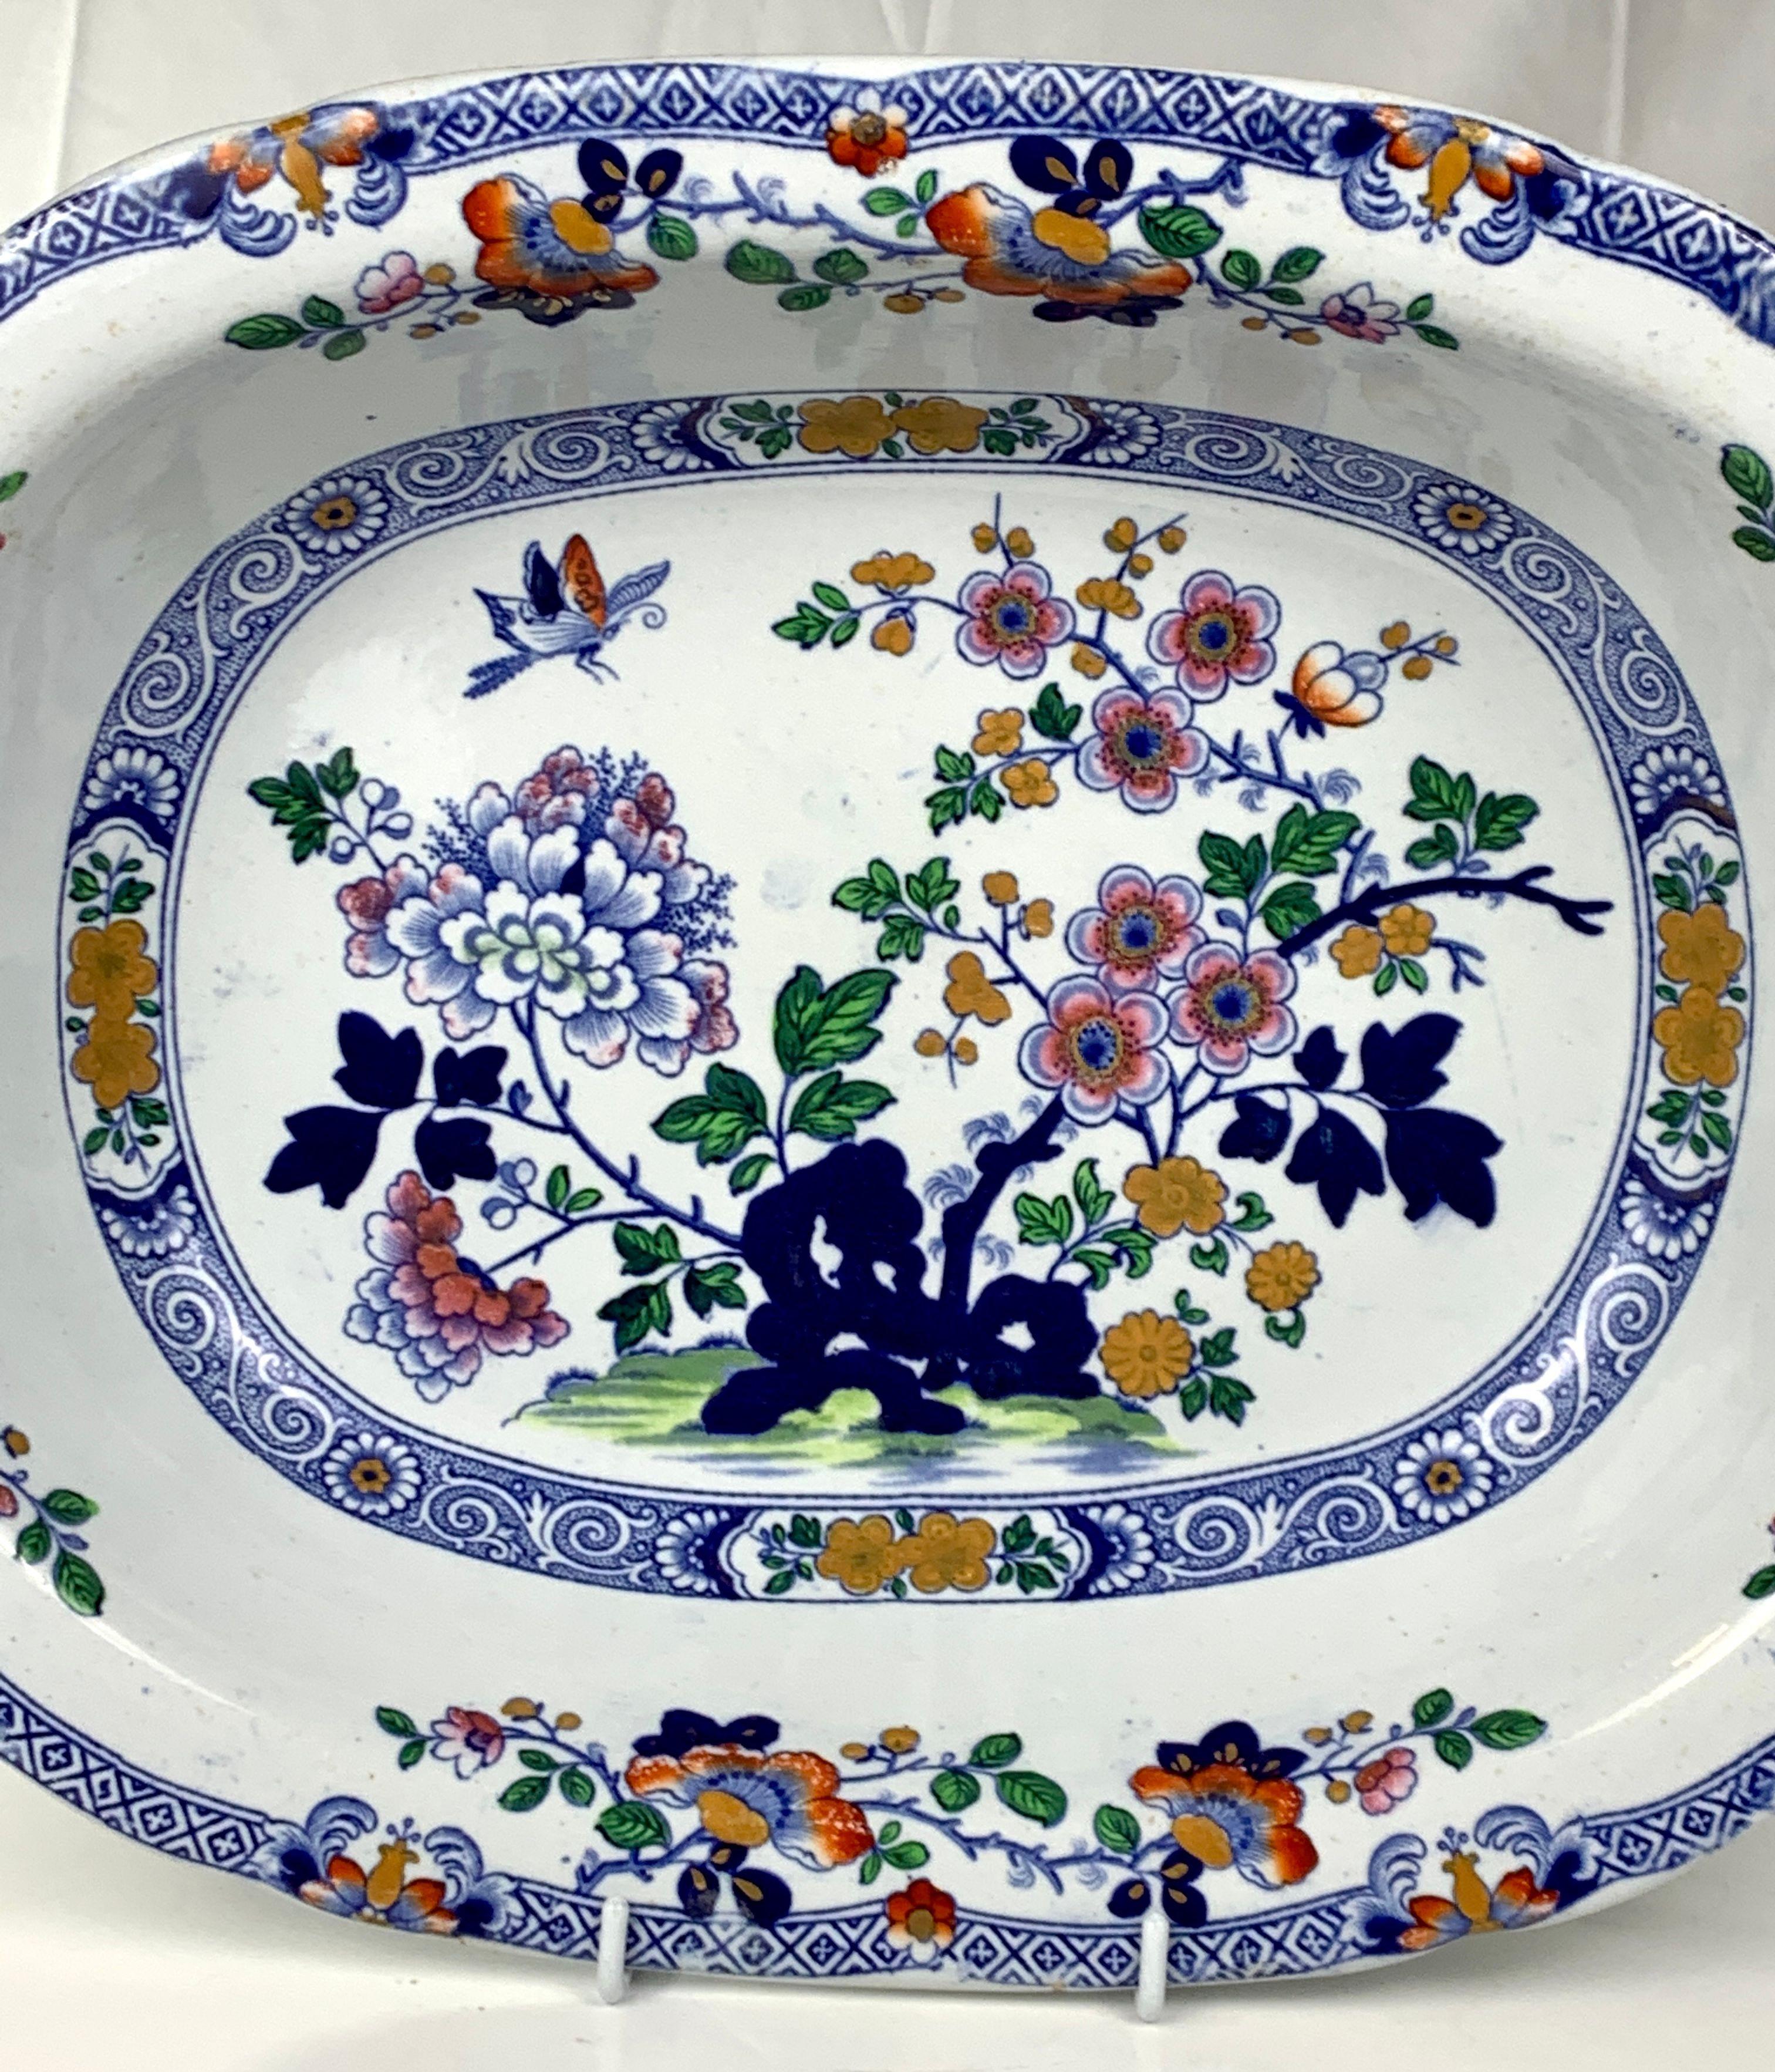 This lovely bowl is decorated with a beautiful garden scene showing a blossoming fruit tree rising from blue rockwork, oversized white and pink peonies, oche-colored chrysanthemums, and a butterfly hovering above.
This beautiful central scene is